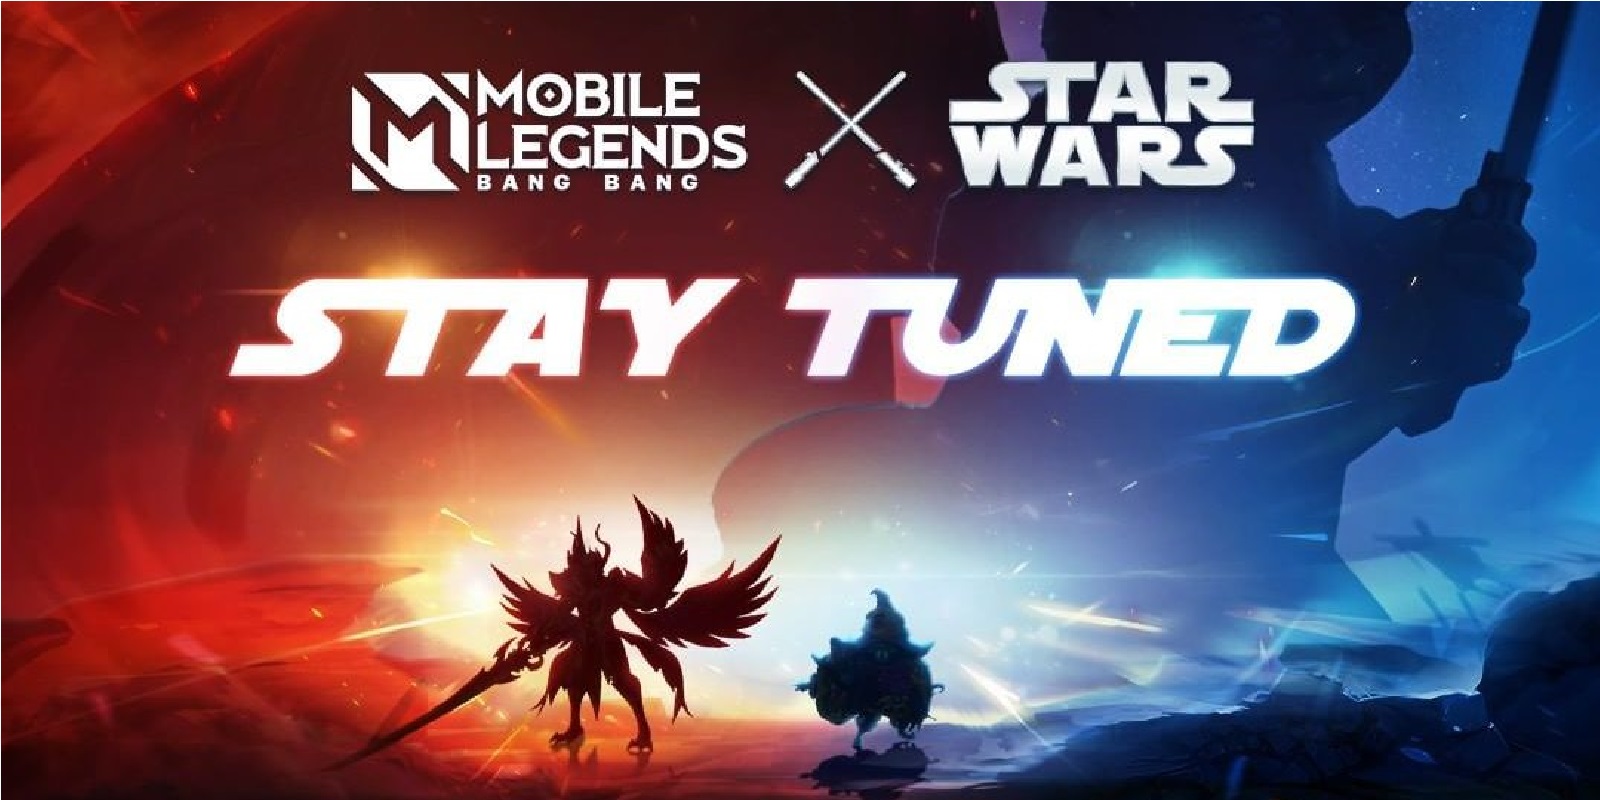 Mobile Legends Officially Announces New MLBB X Star Wars Collaboration